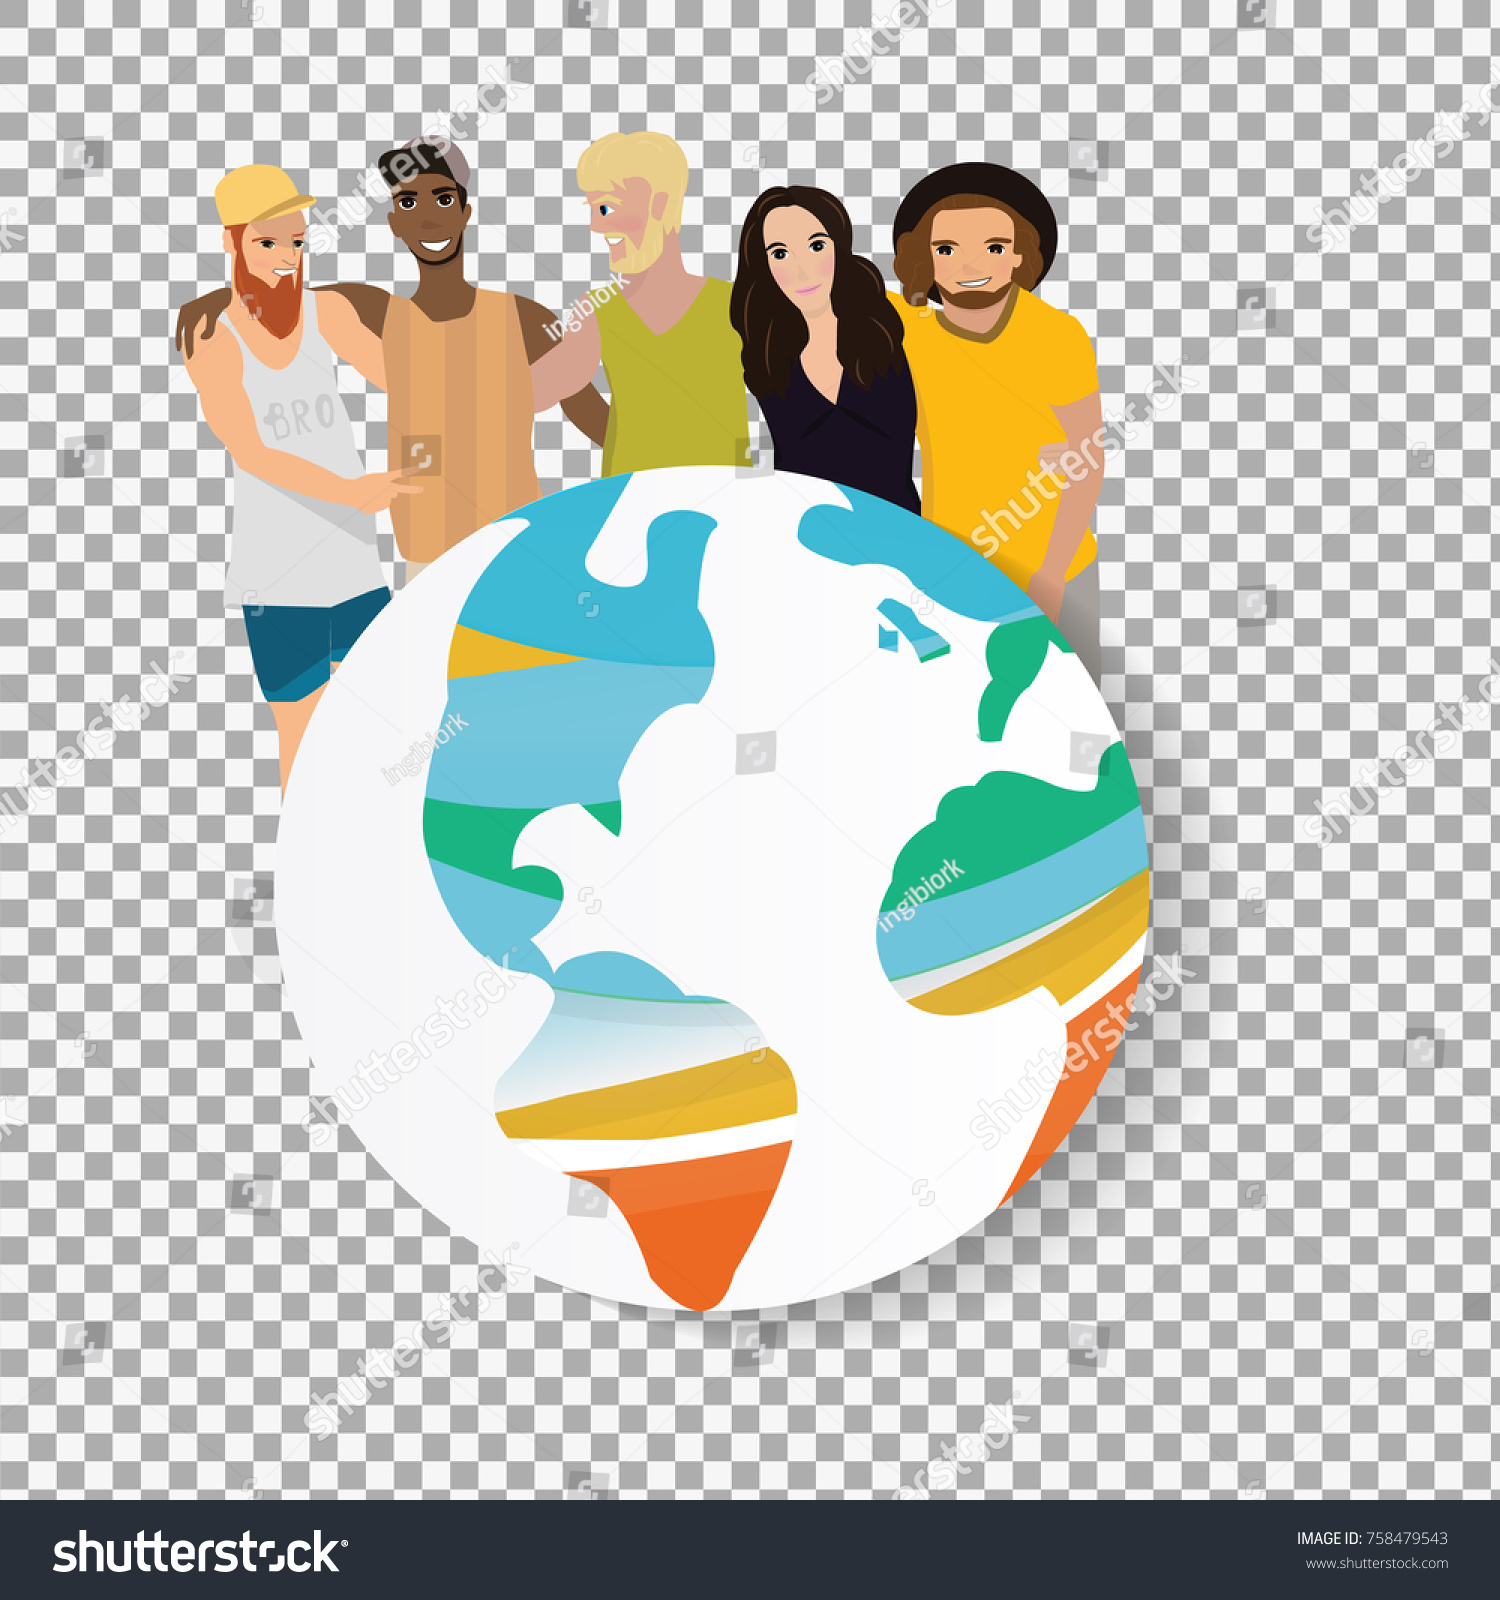 People Characters Scene On Transparent Background Stock Vector Royalty Free